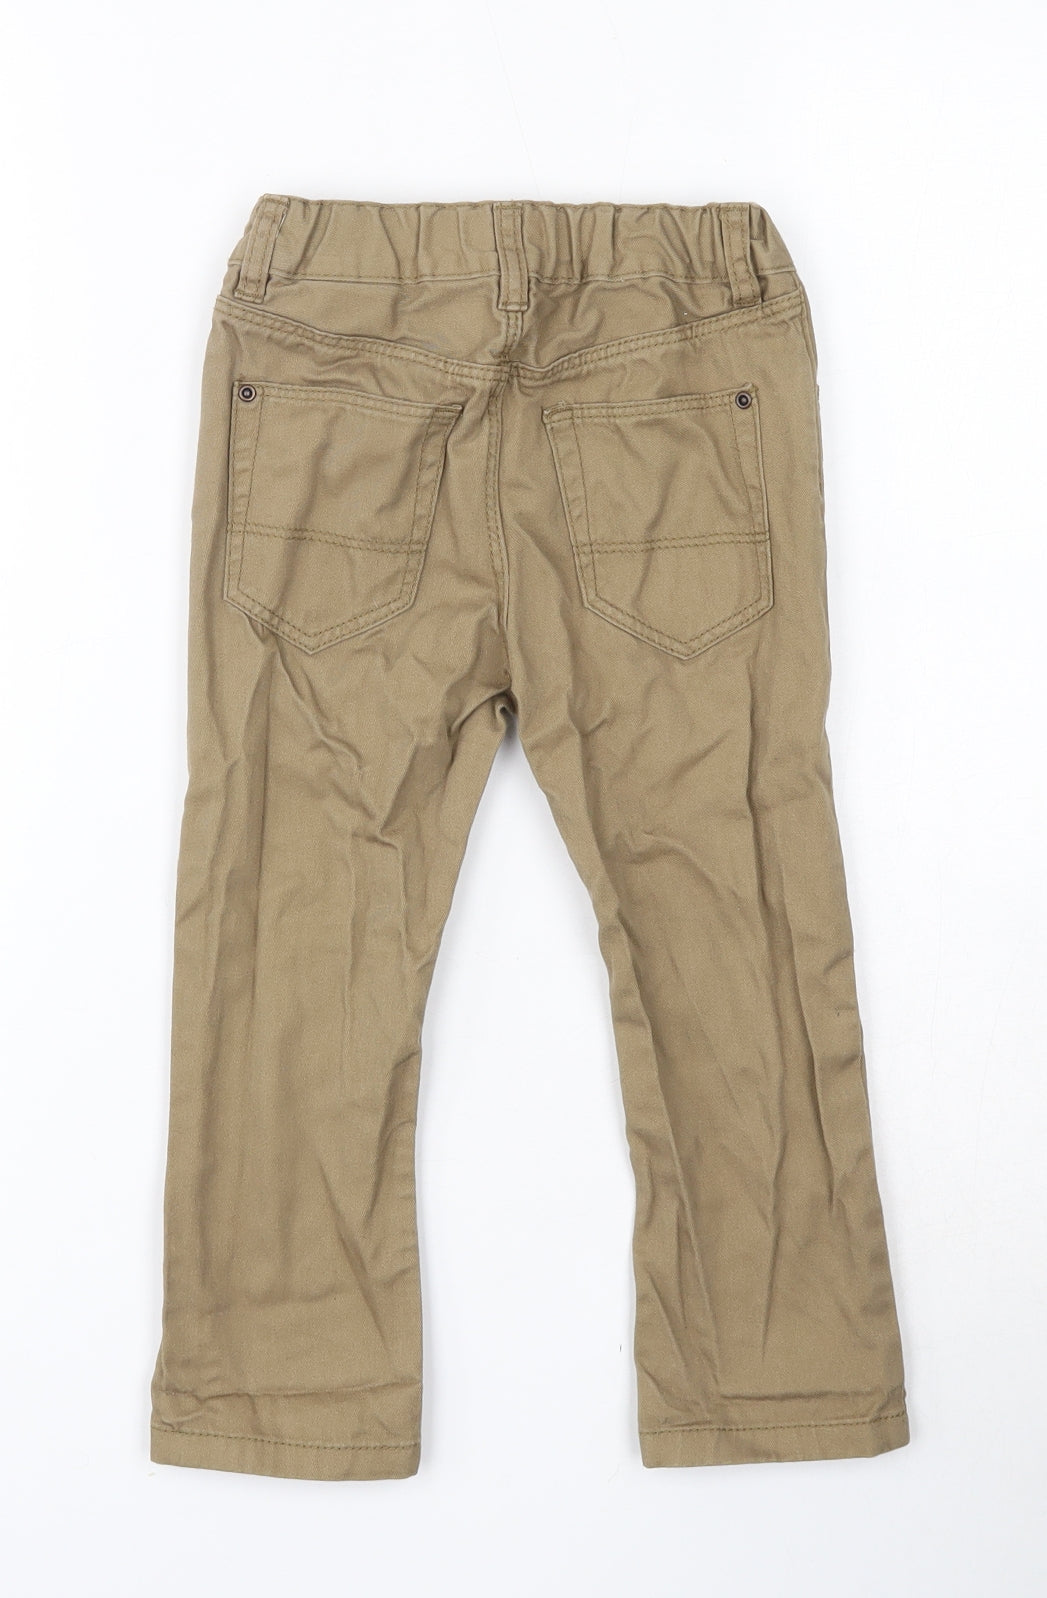 H&M Boys Brown  Cotton Straight Jeans Size 2-3 Years  Regular Button